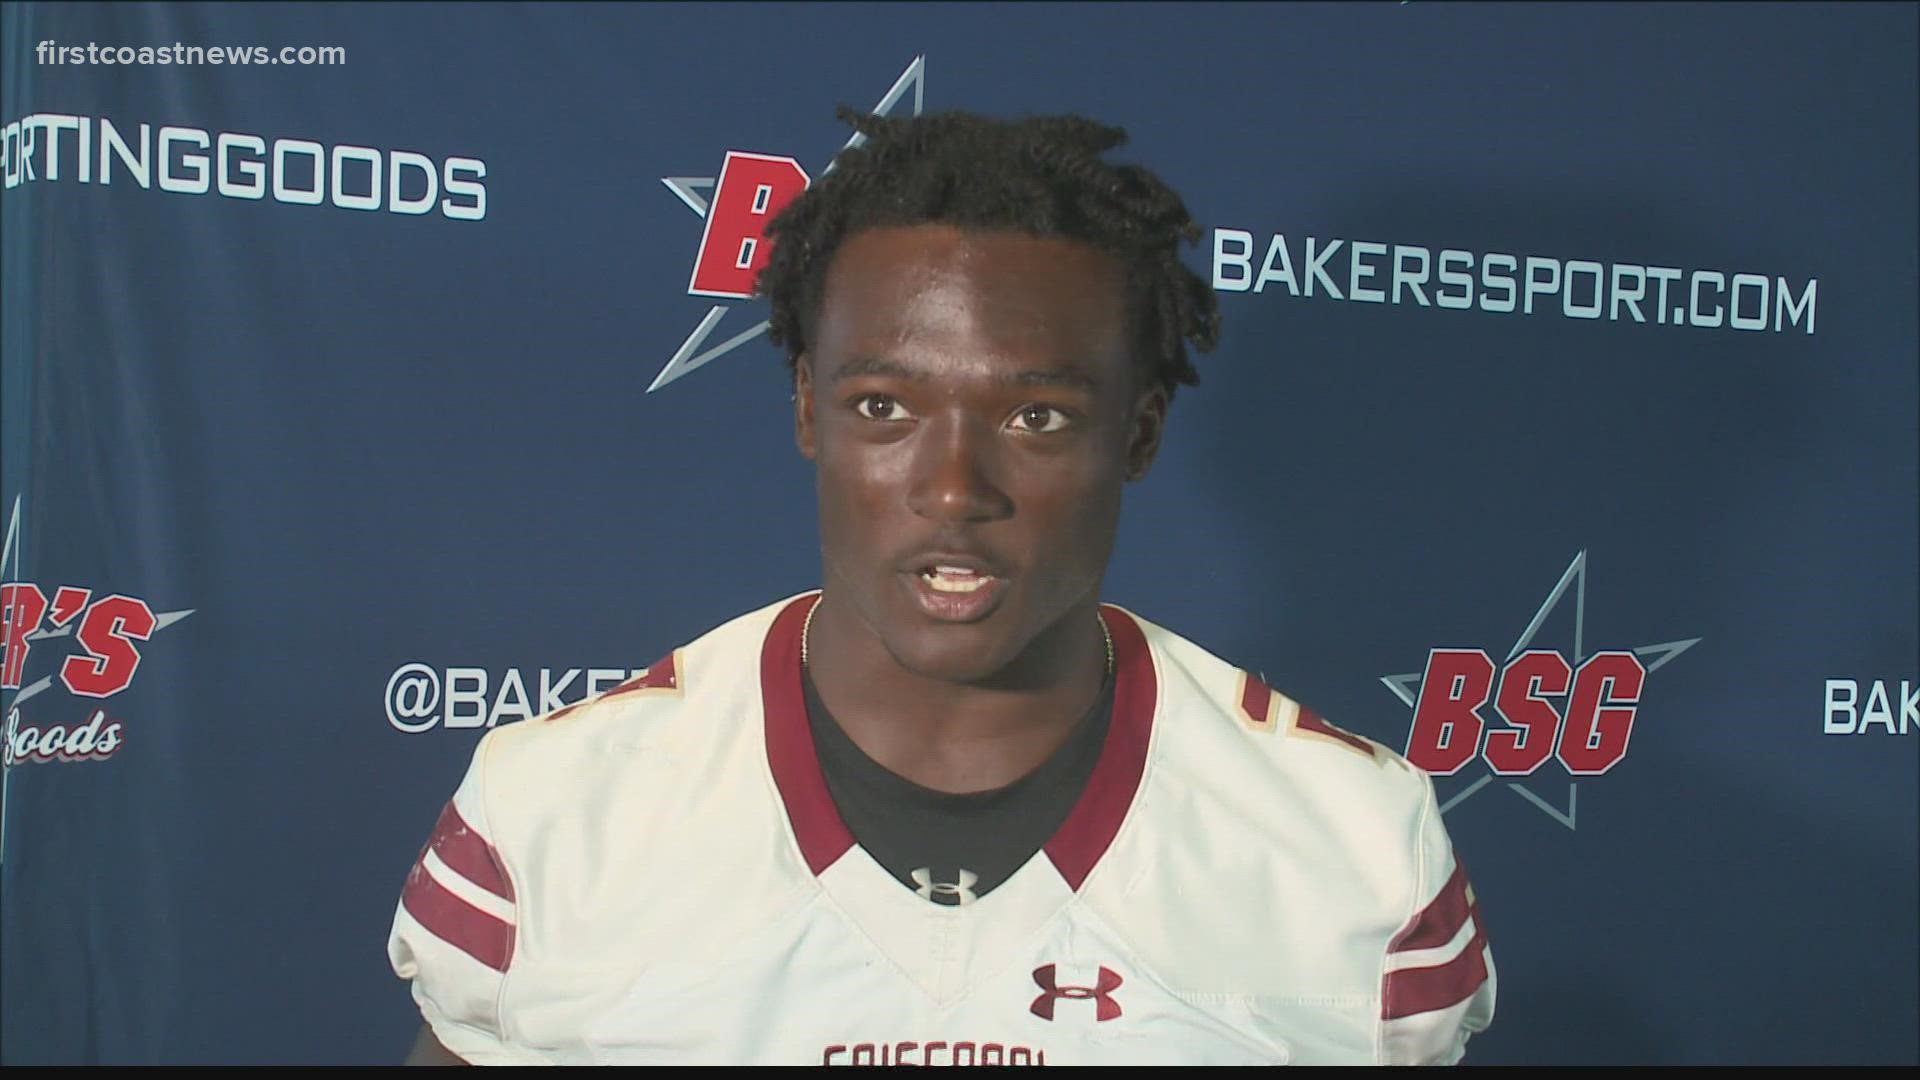 Ershod already has nine touchdowns in six games. He also hopes to gain 1,500 yards on the season.